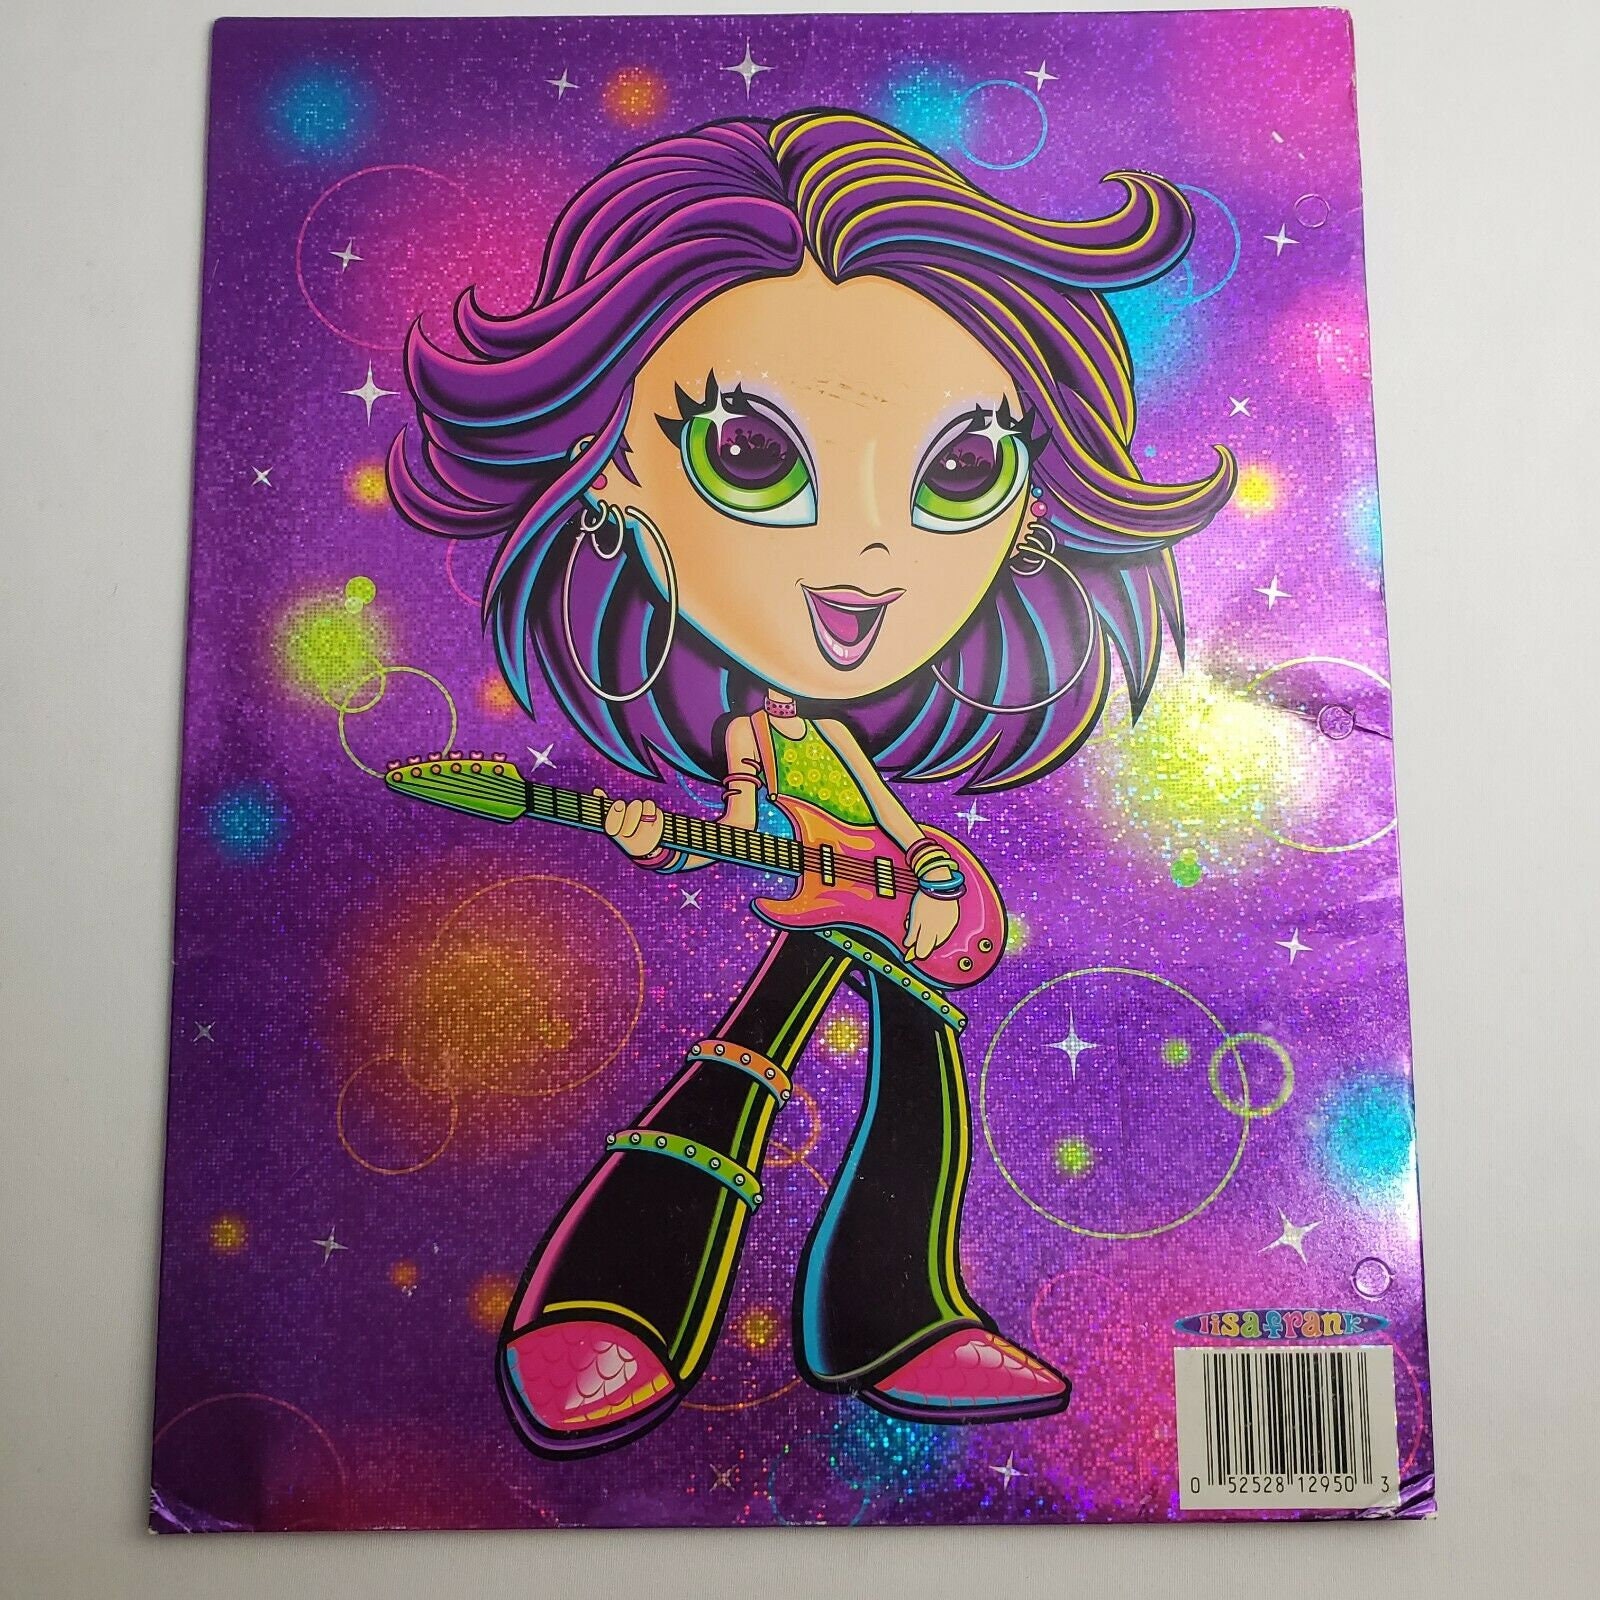 NEW Early 2000s Vintage Lisa Frank Rainbow Star Two (2) Pocket